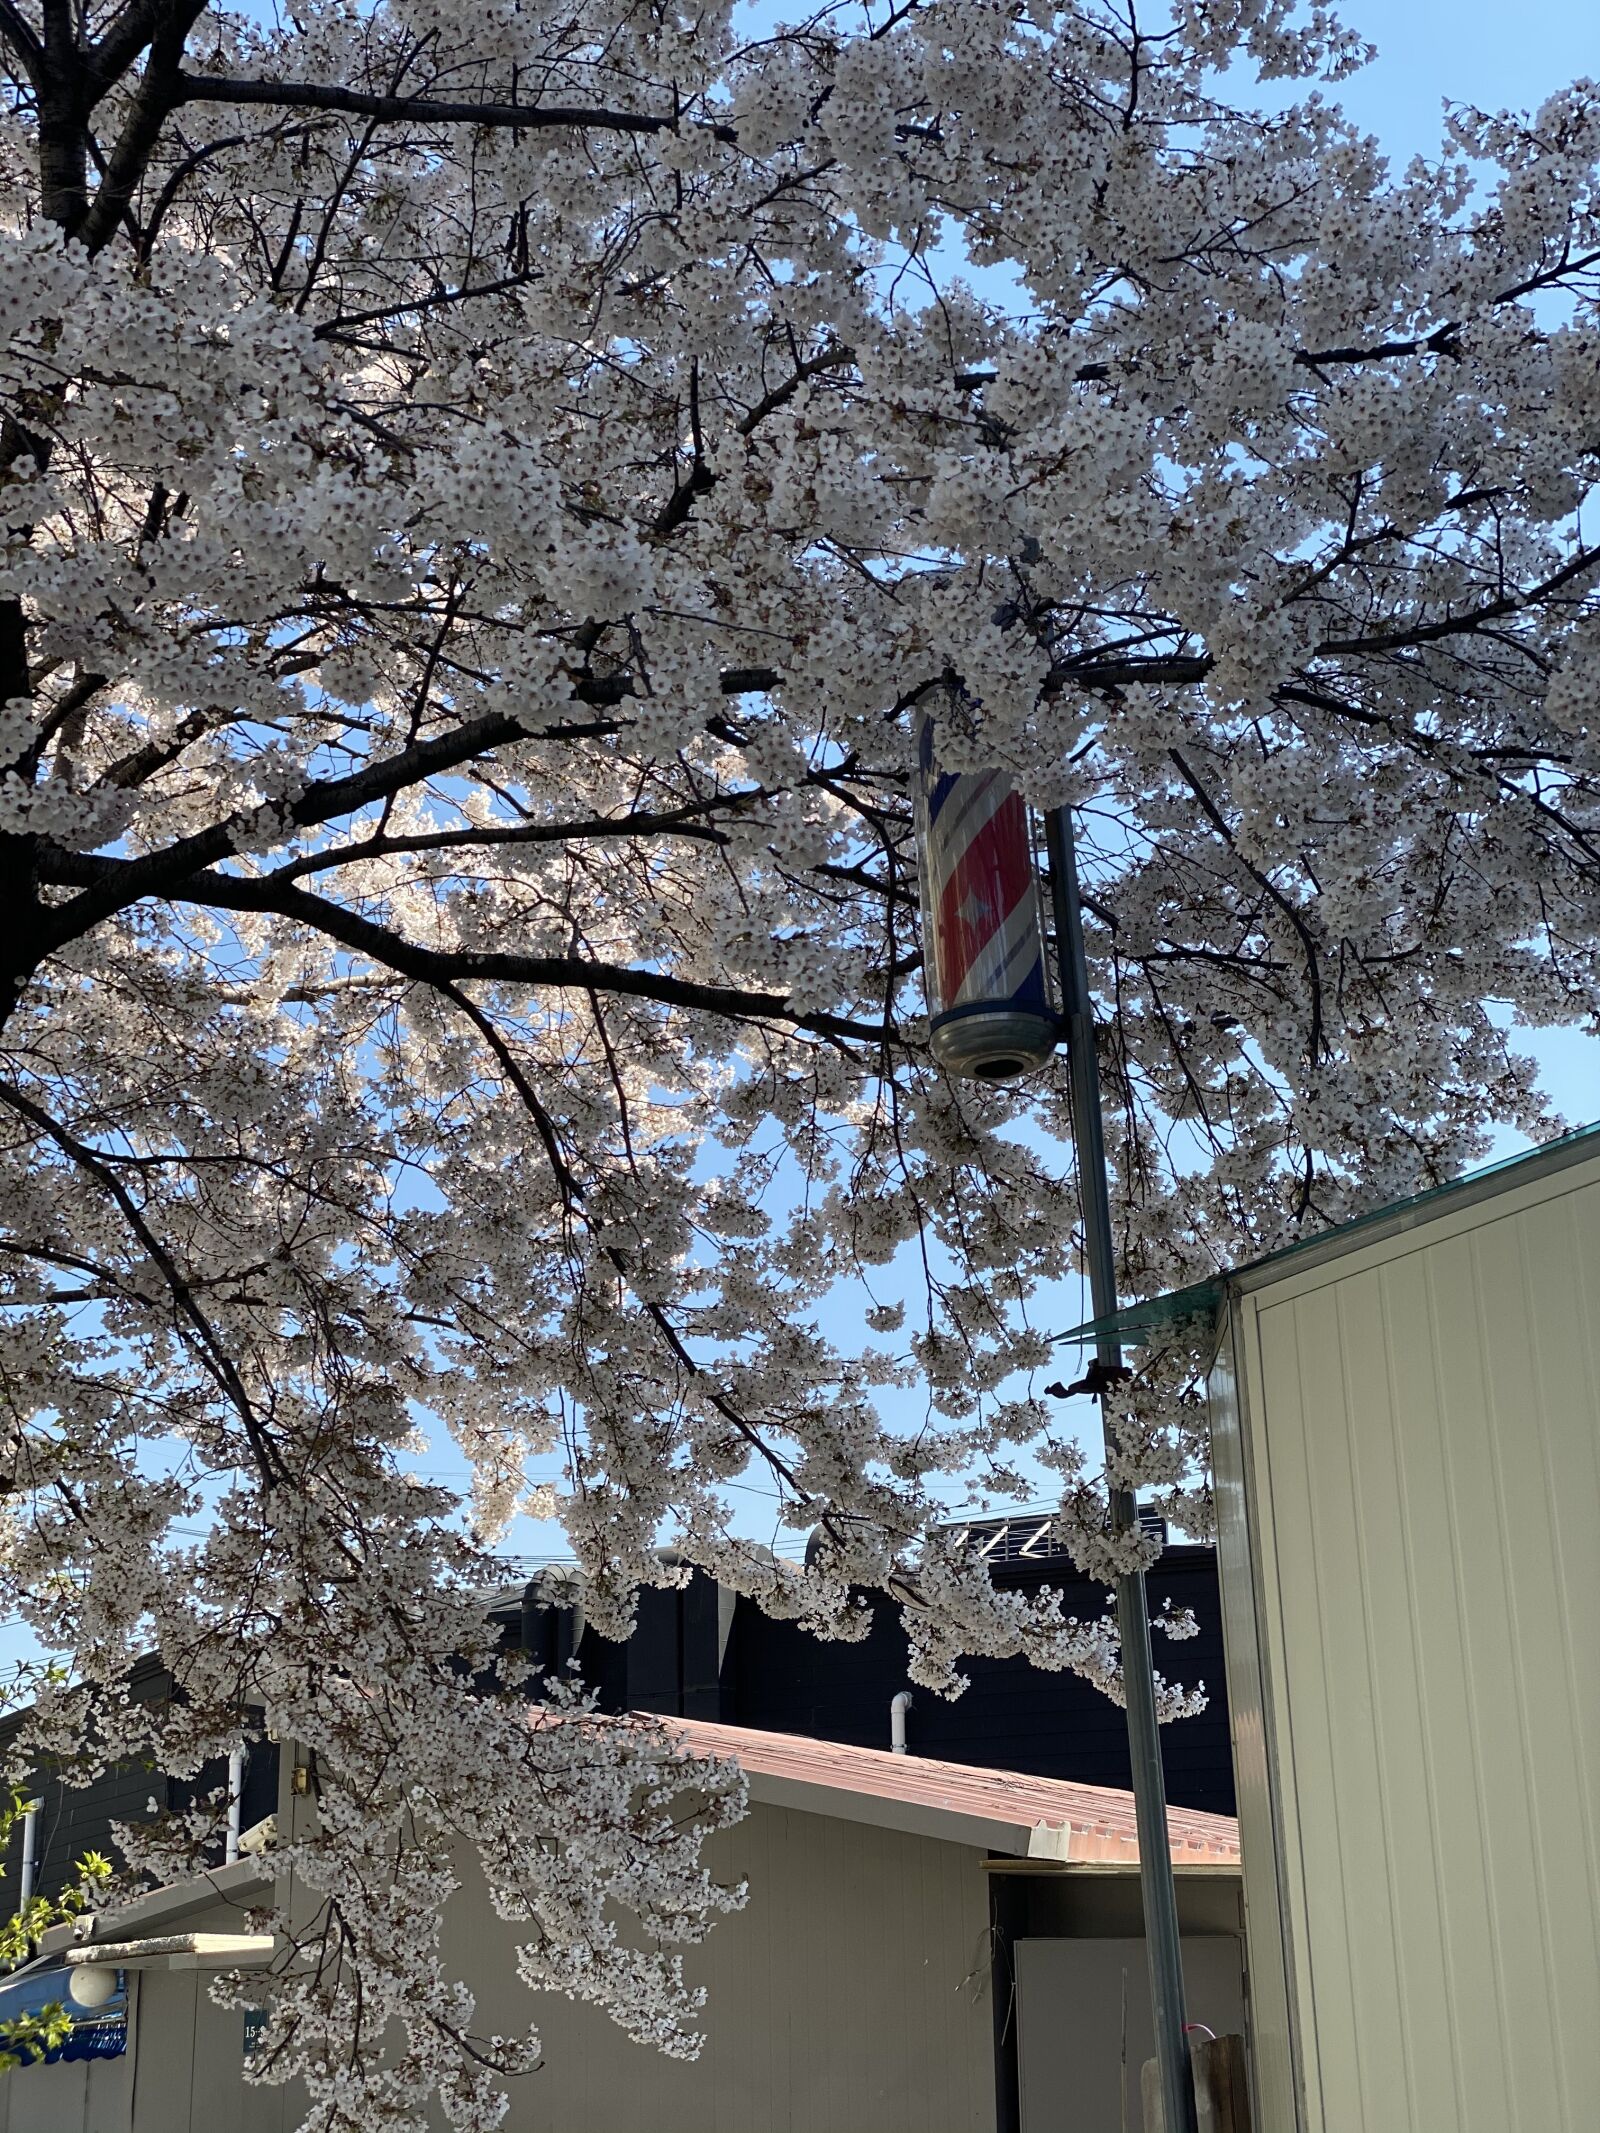 iPhone 11 Pro back dual camera 6mm f/2 sample photo. Cherry blossom, barbershop, the photography